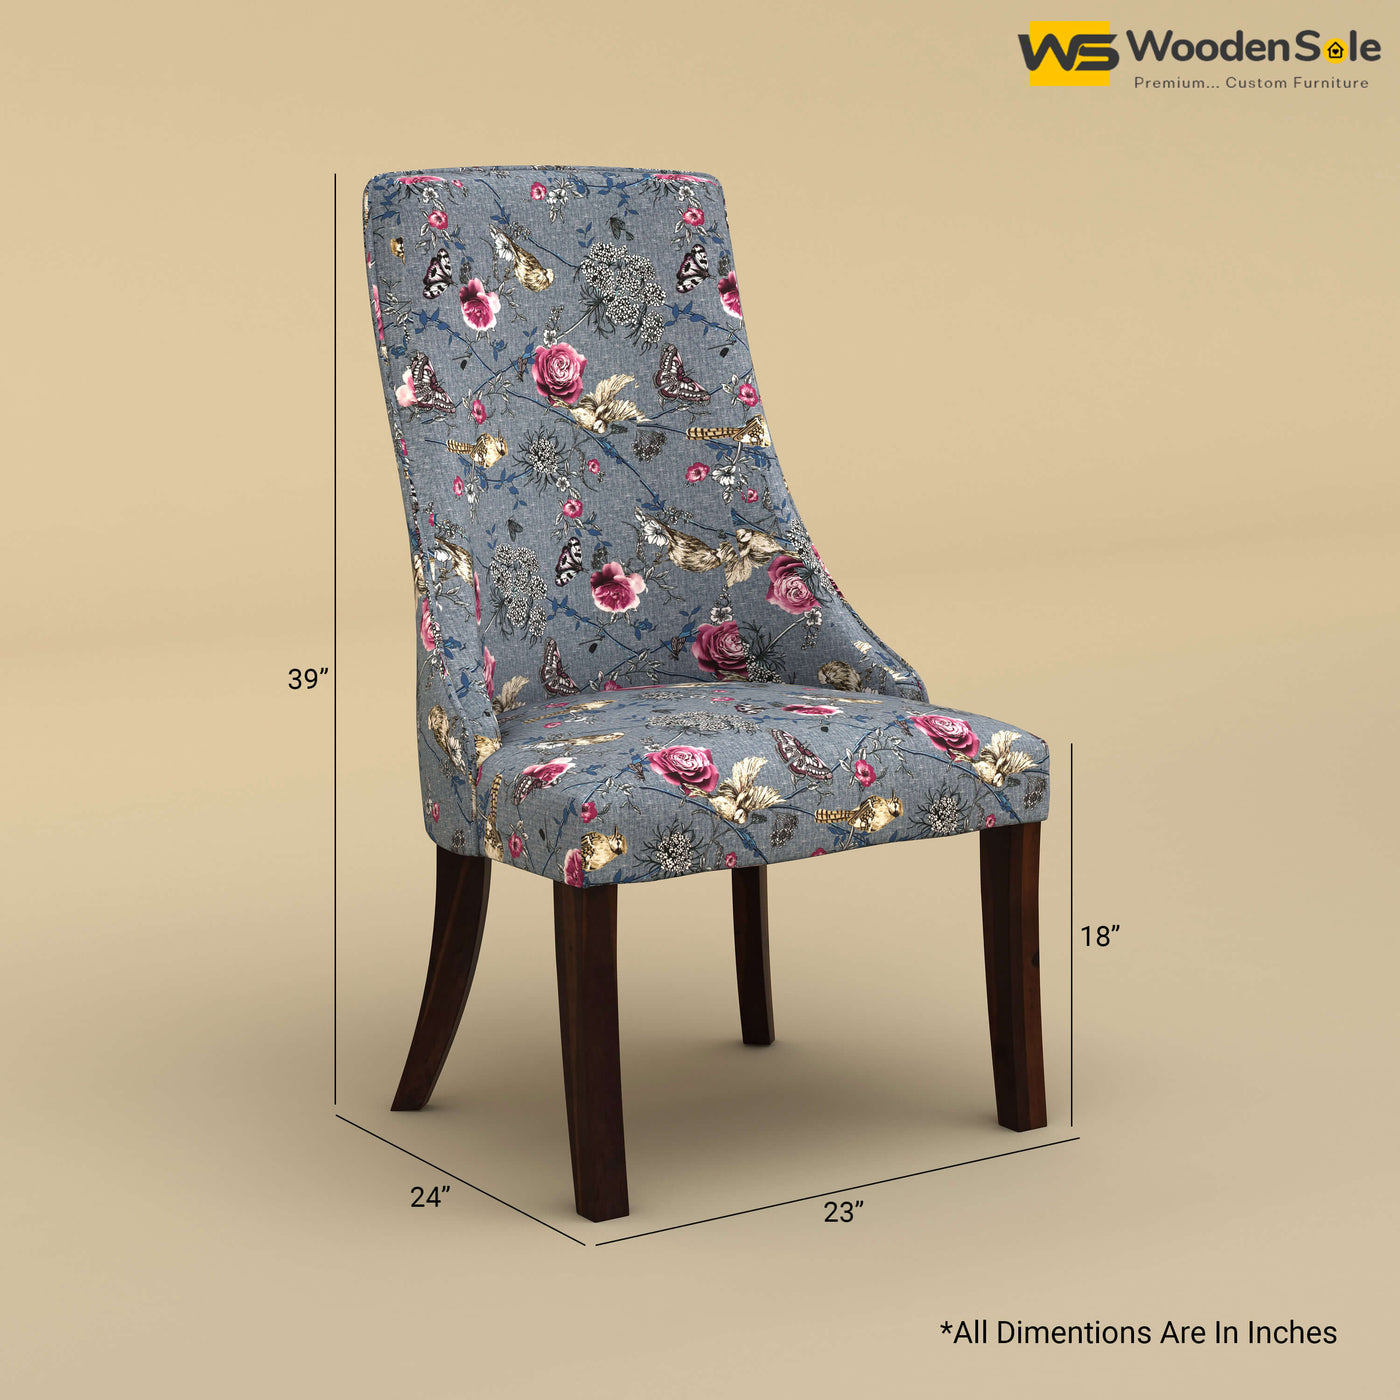 Dublin Dining Chair (Cotton, Floral Printed)